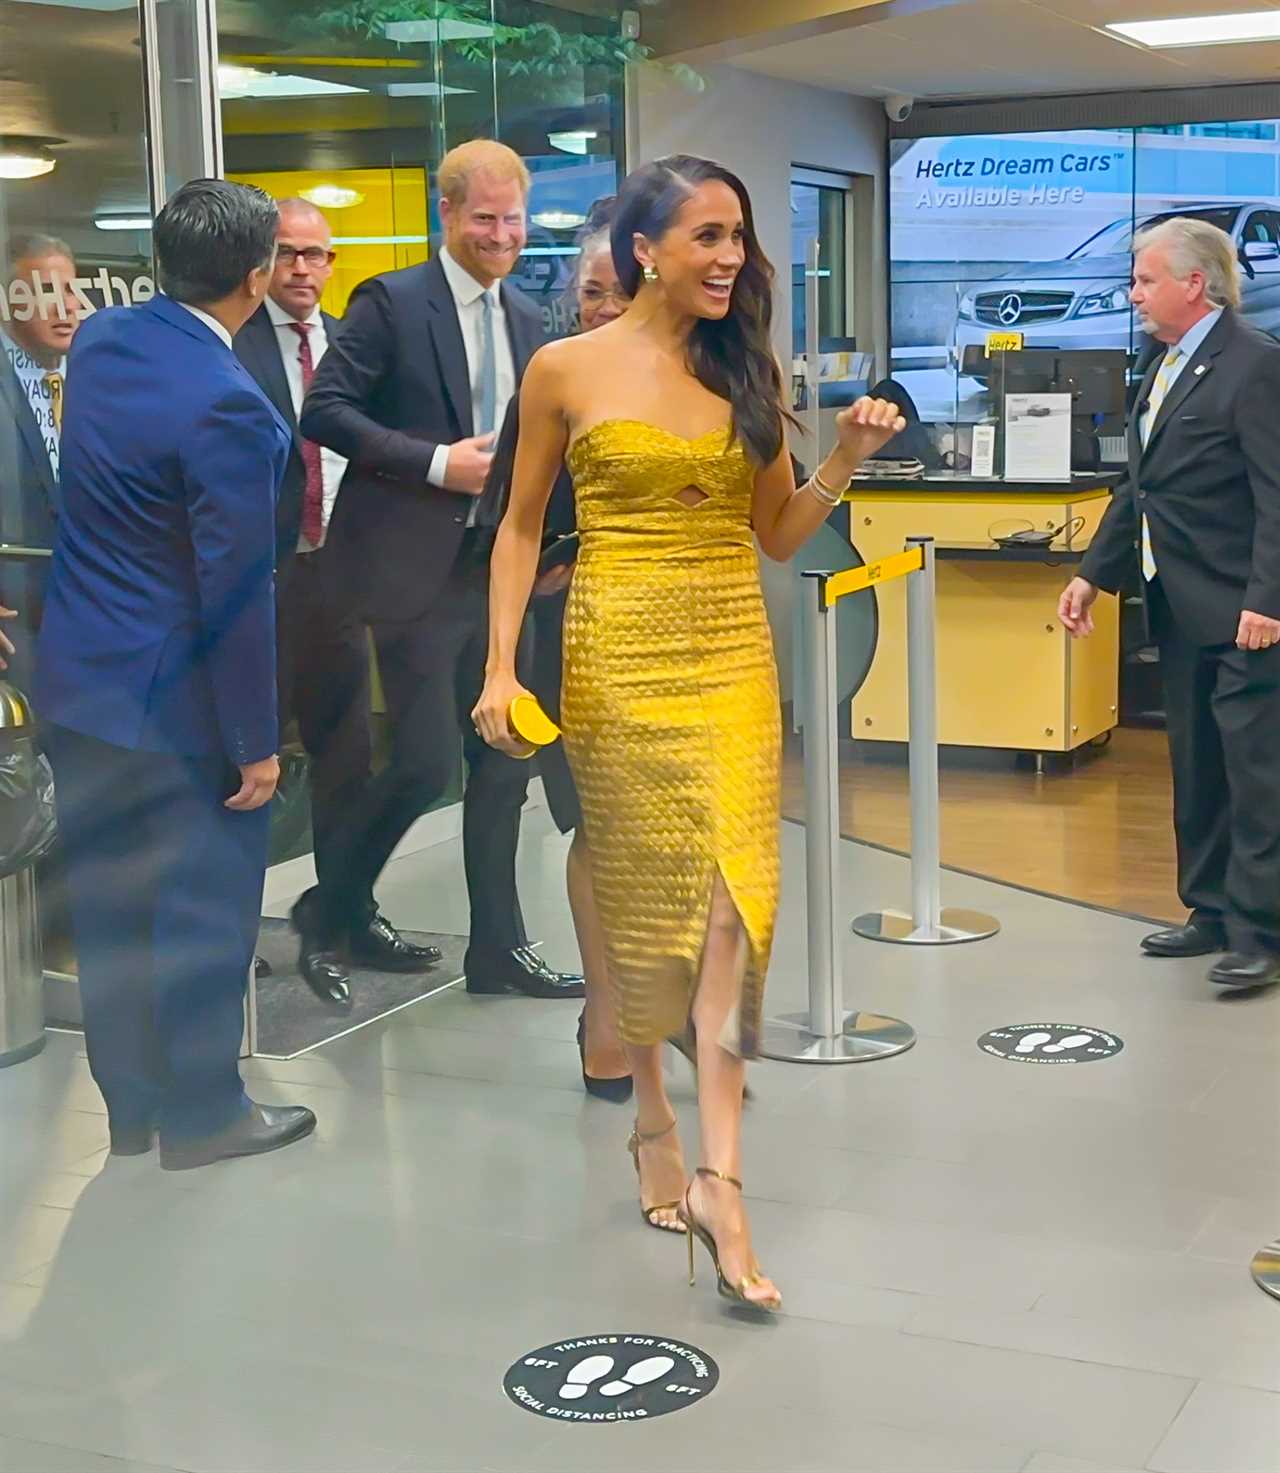 Meghan Markle’s fans in disbelief as she makes VERY unusual and unglamorous entrance at awards for ‘security reasons’